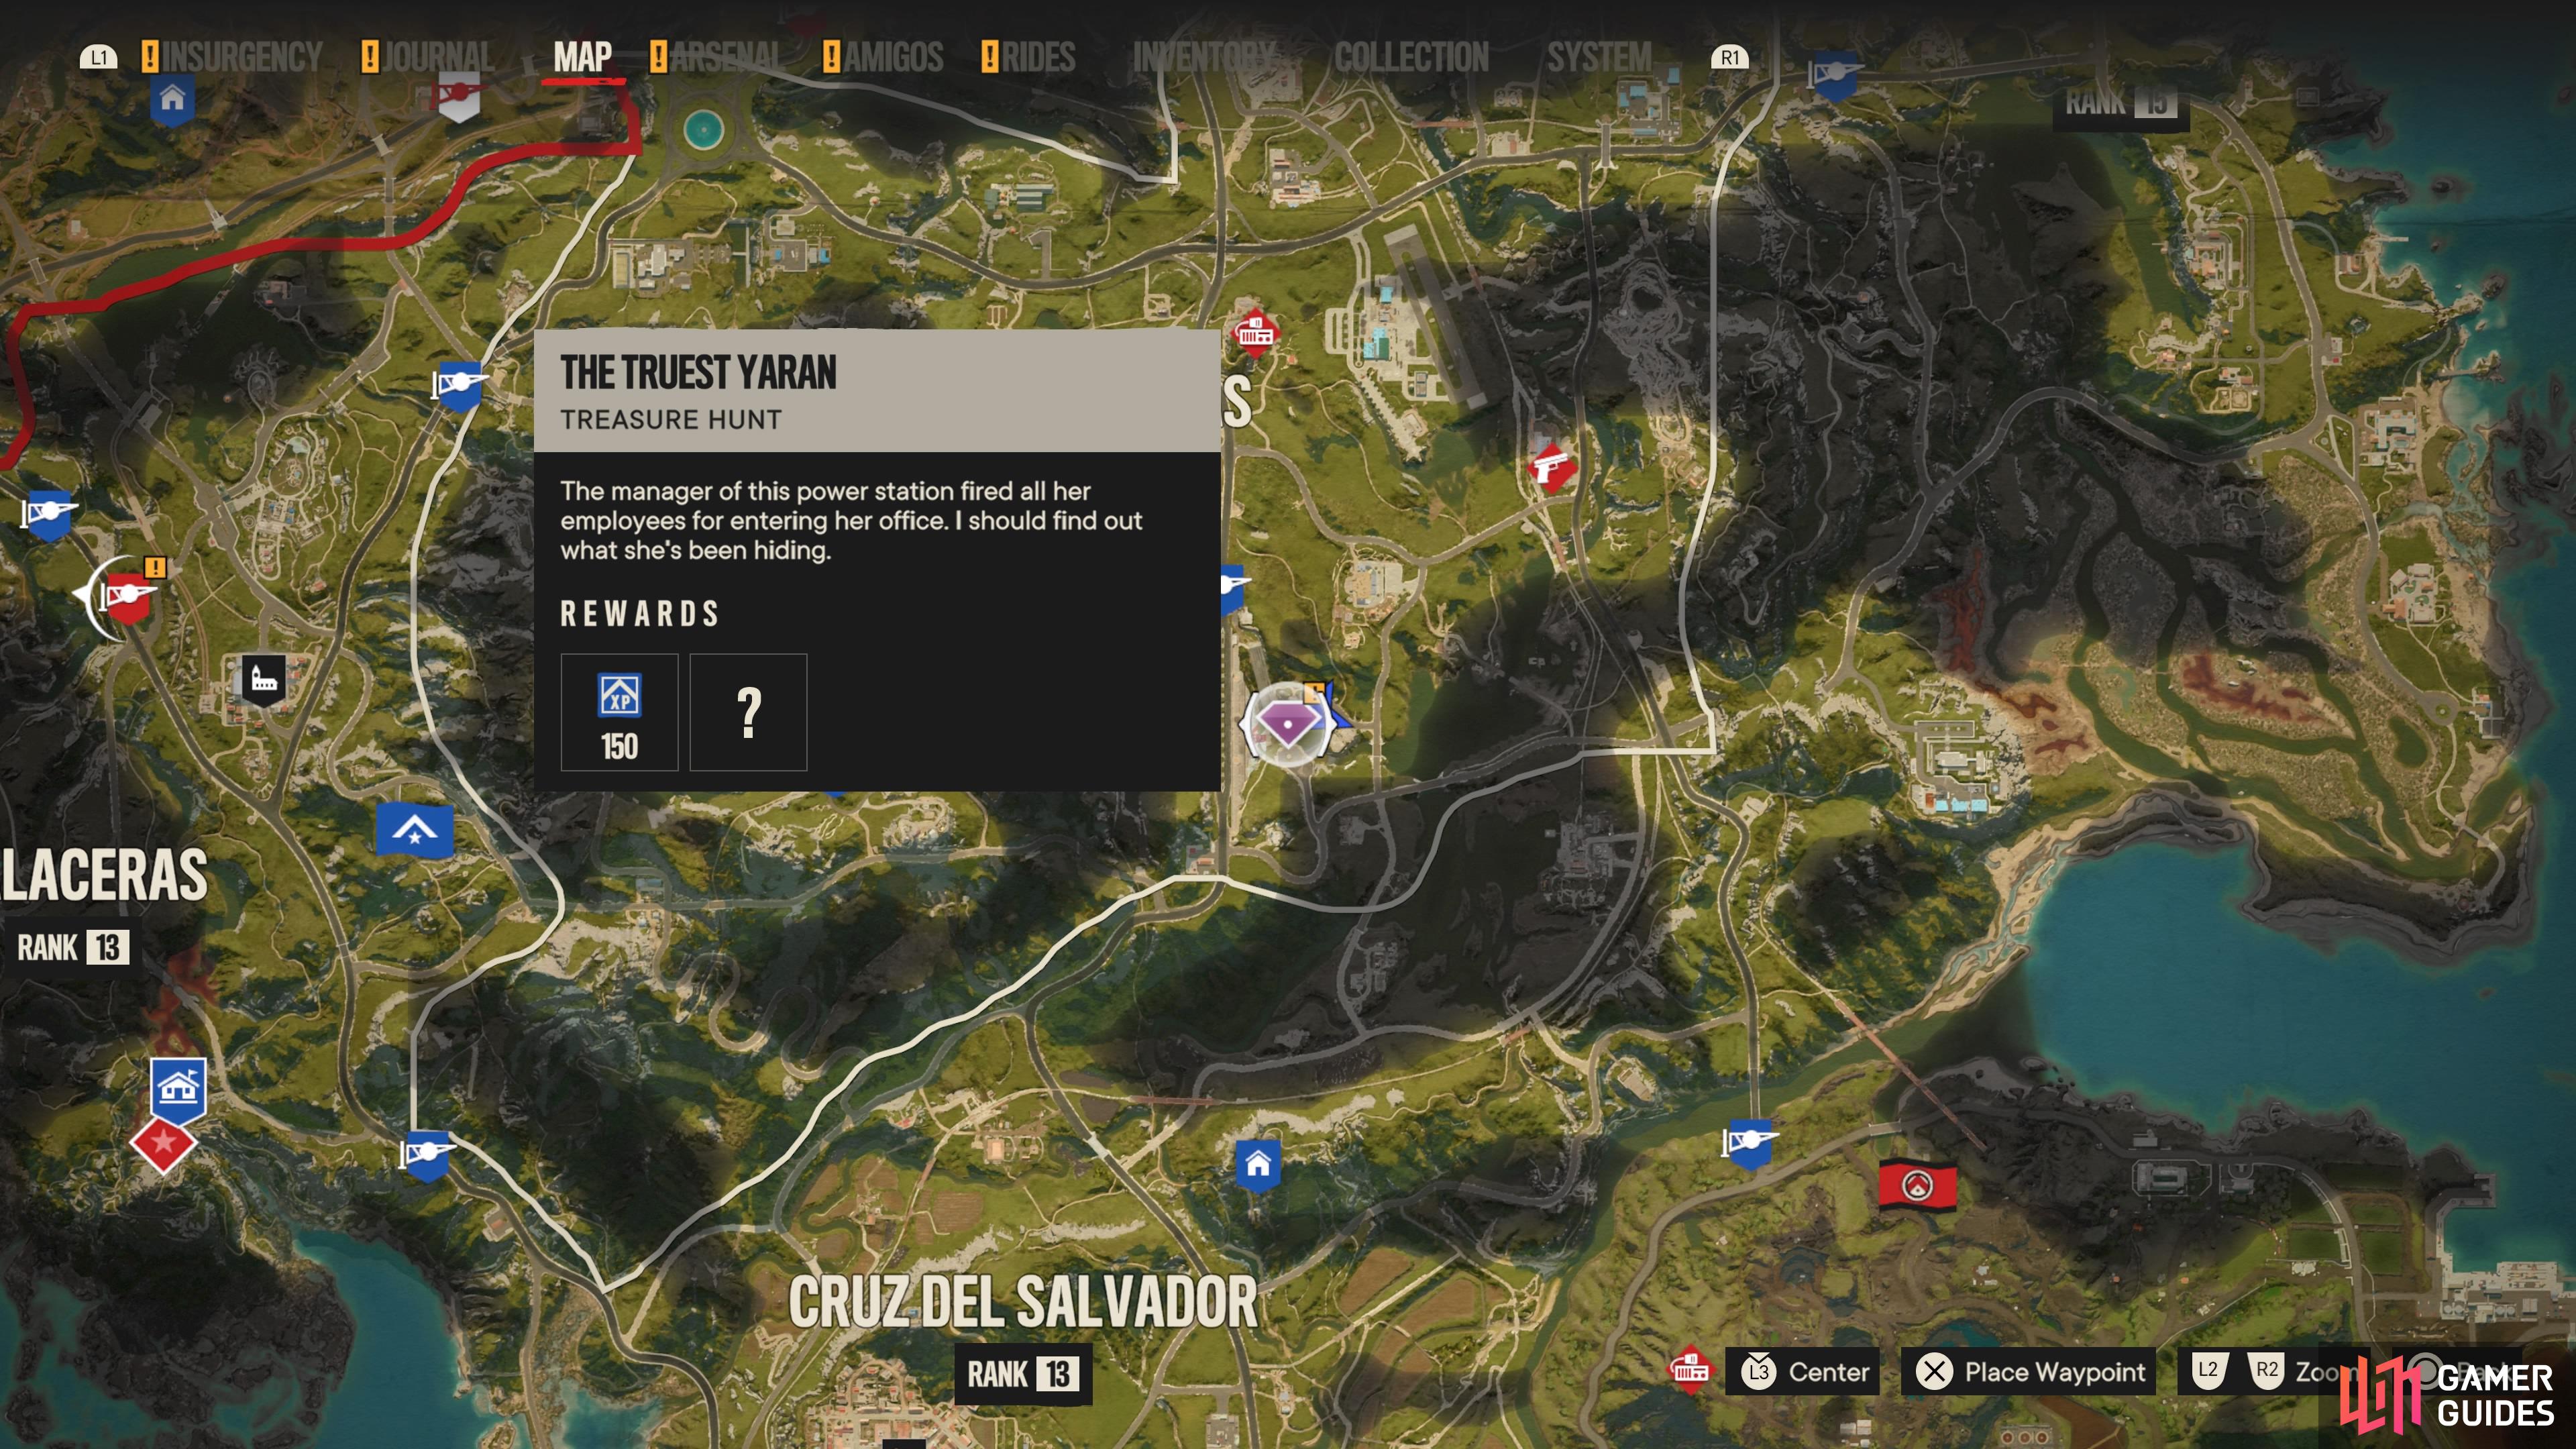 Head to this location on the map to start this quest.